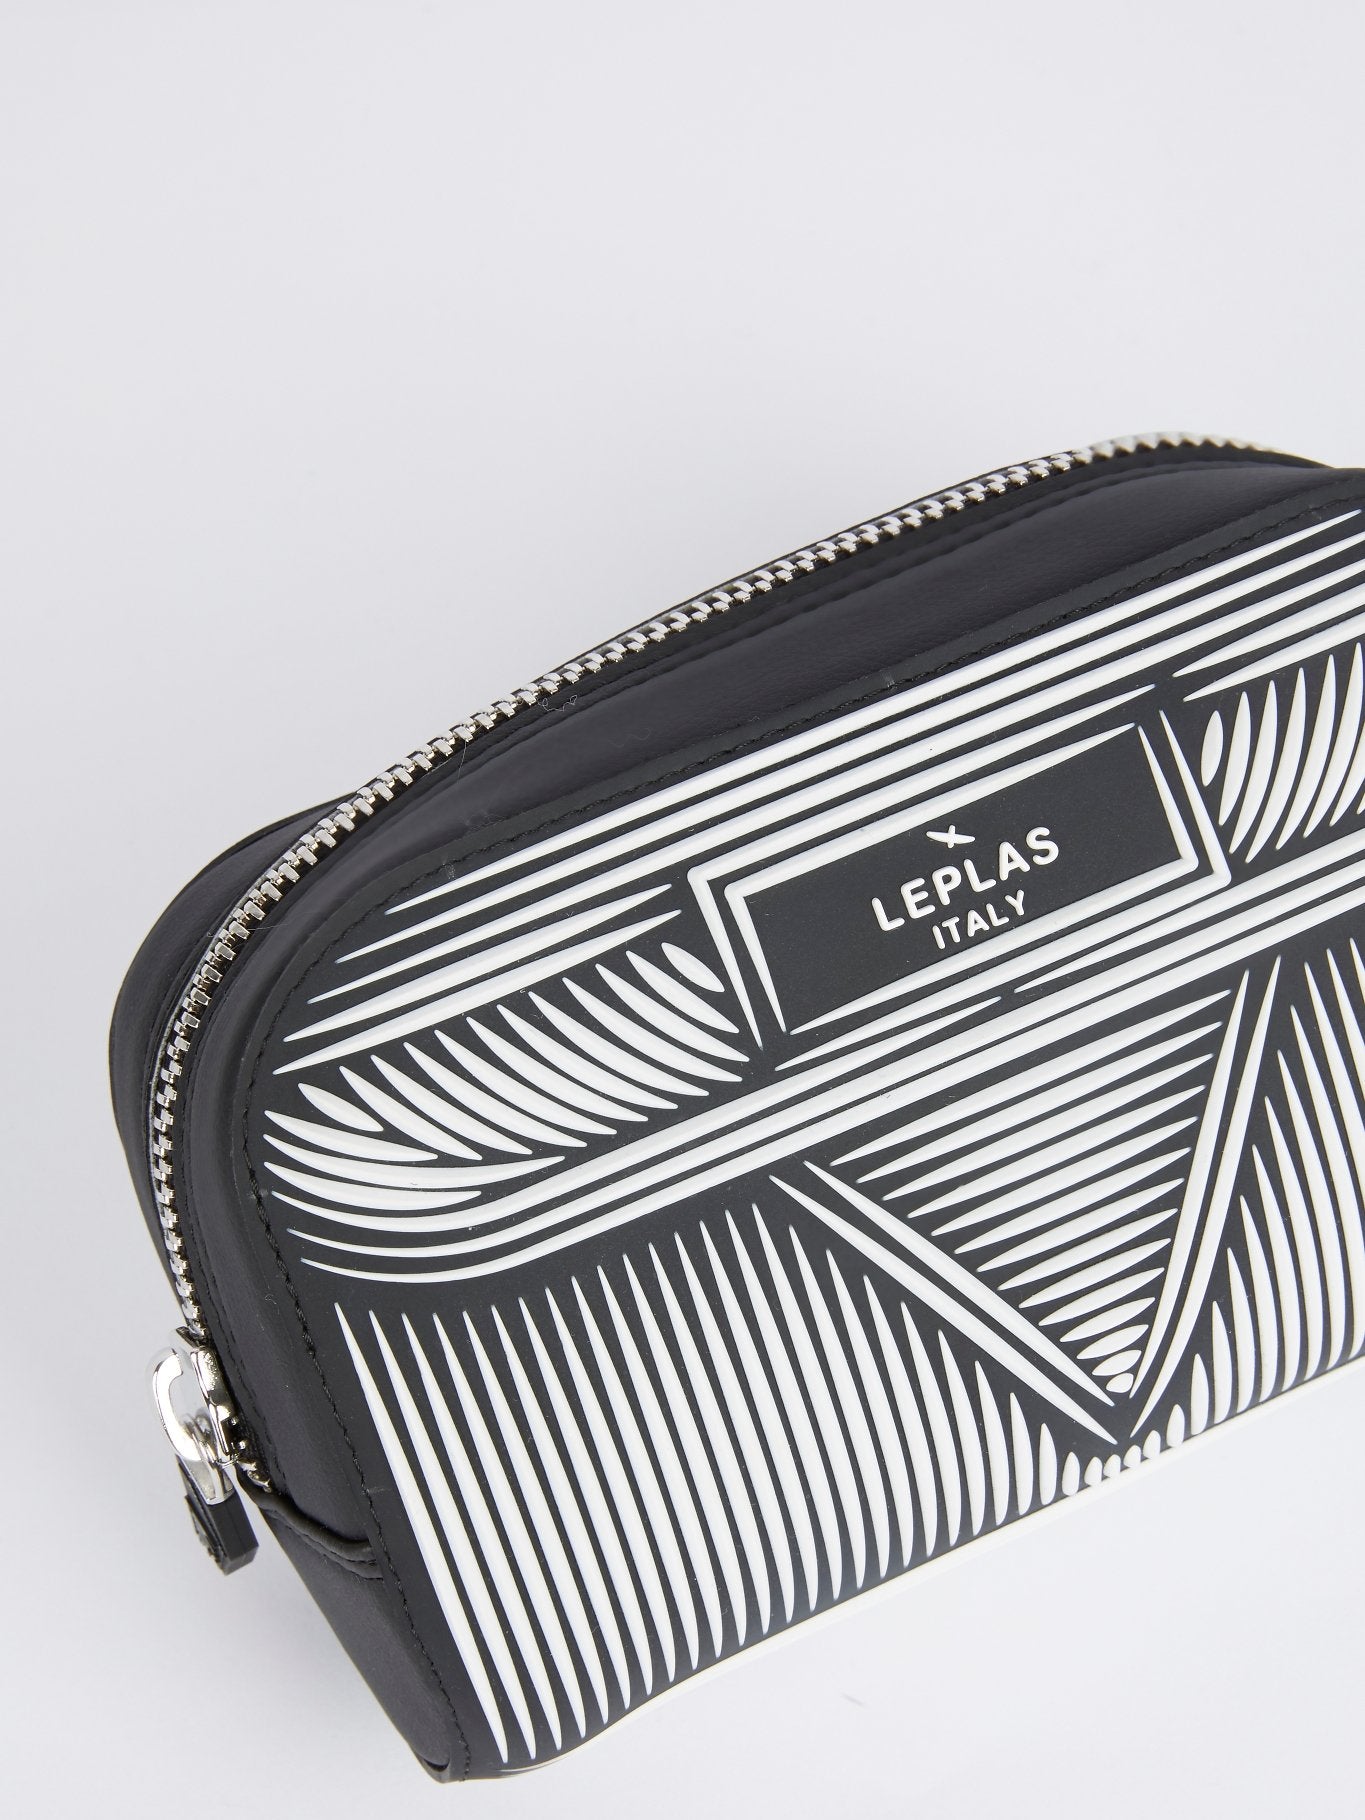 Black and White Kyros Optical Pouch Bag